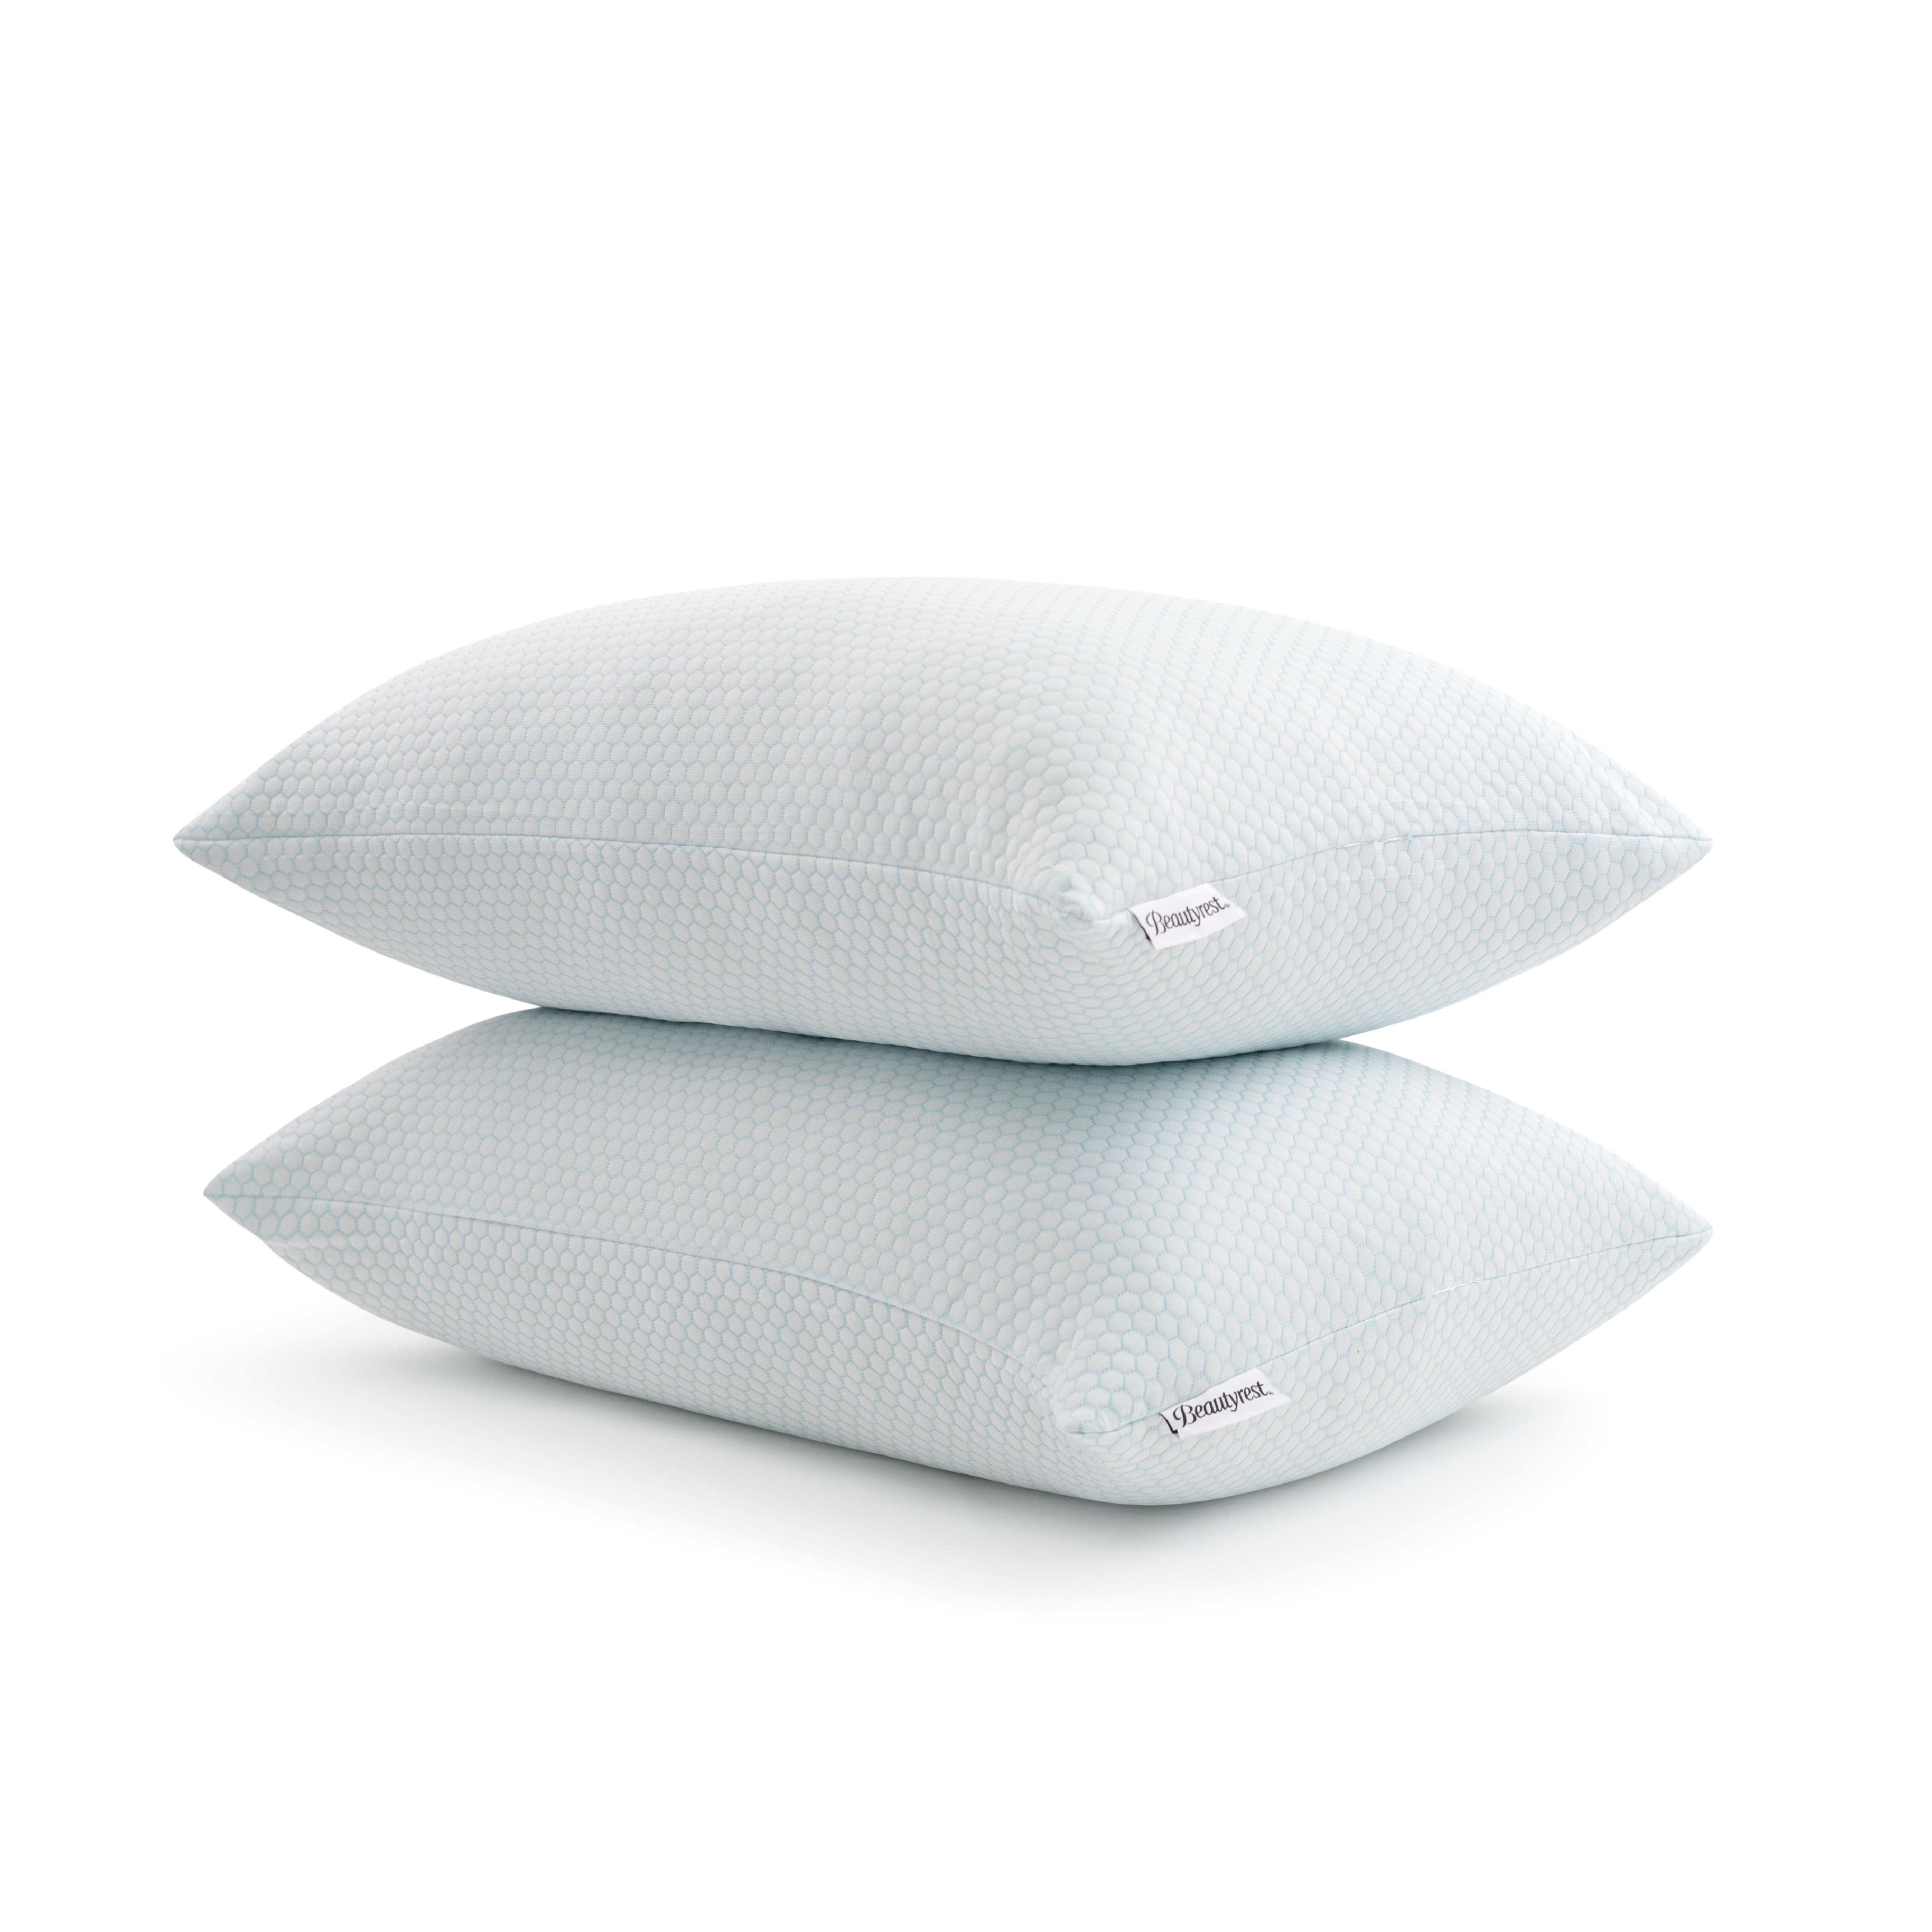 LuxClub Luxury Hotel Collection Cooling Pillows, Down Alternative Gel